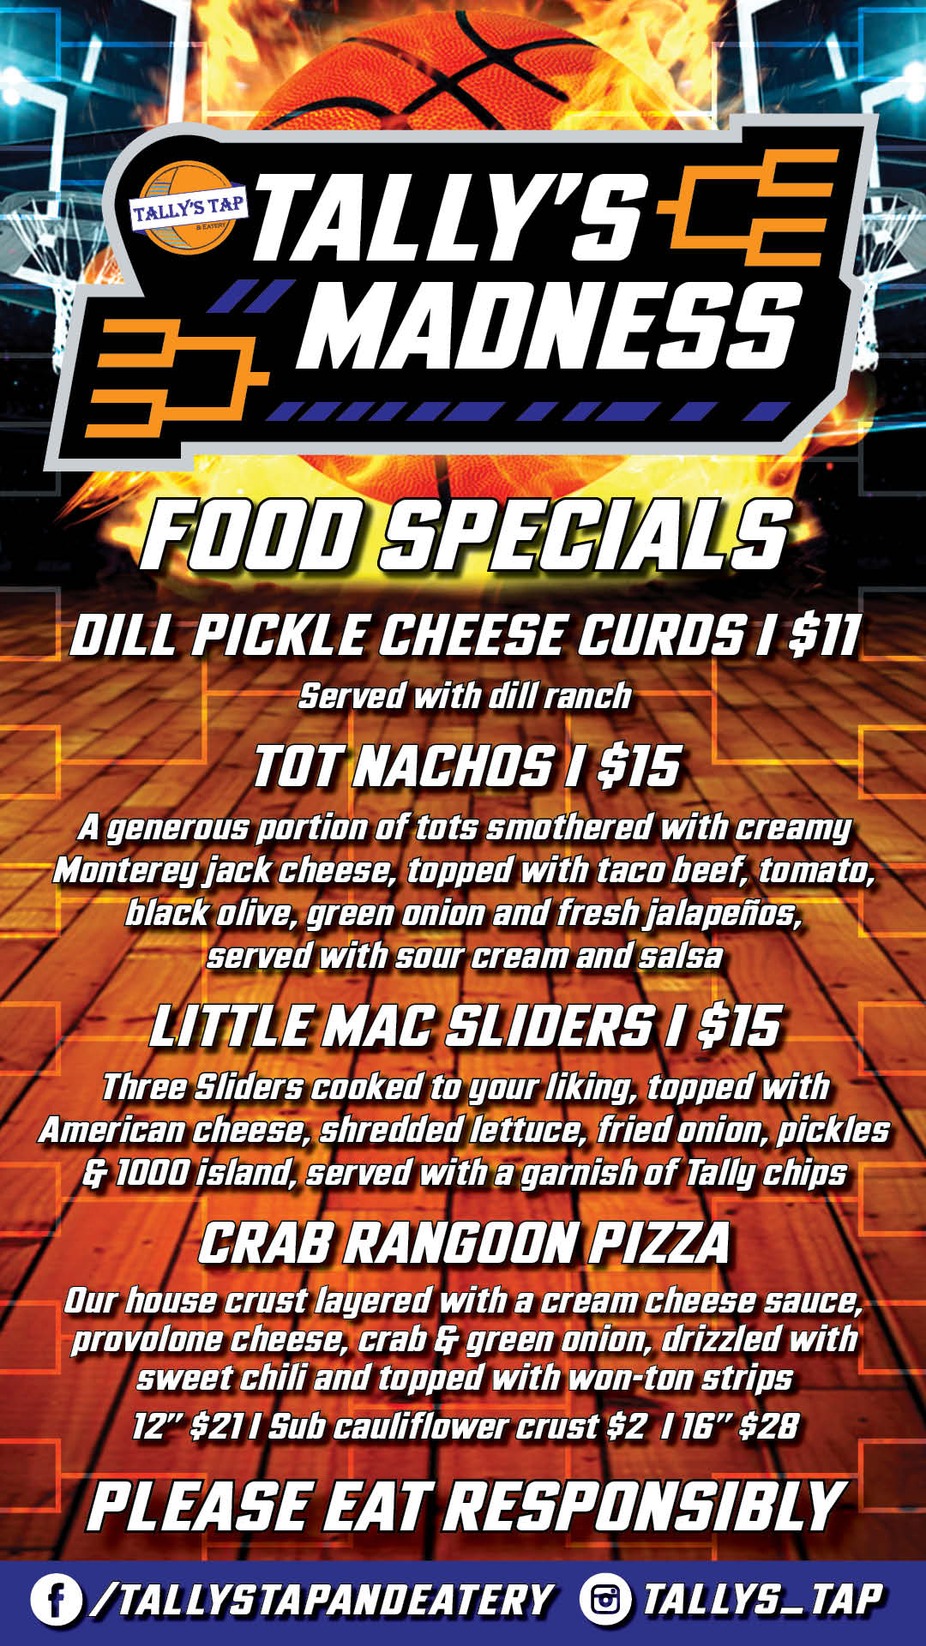 TALLY'S MADNESS FOOD SPECIALS event photo